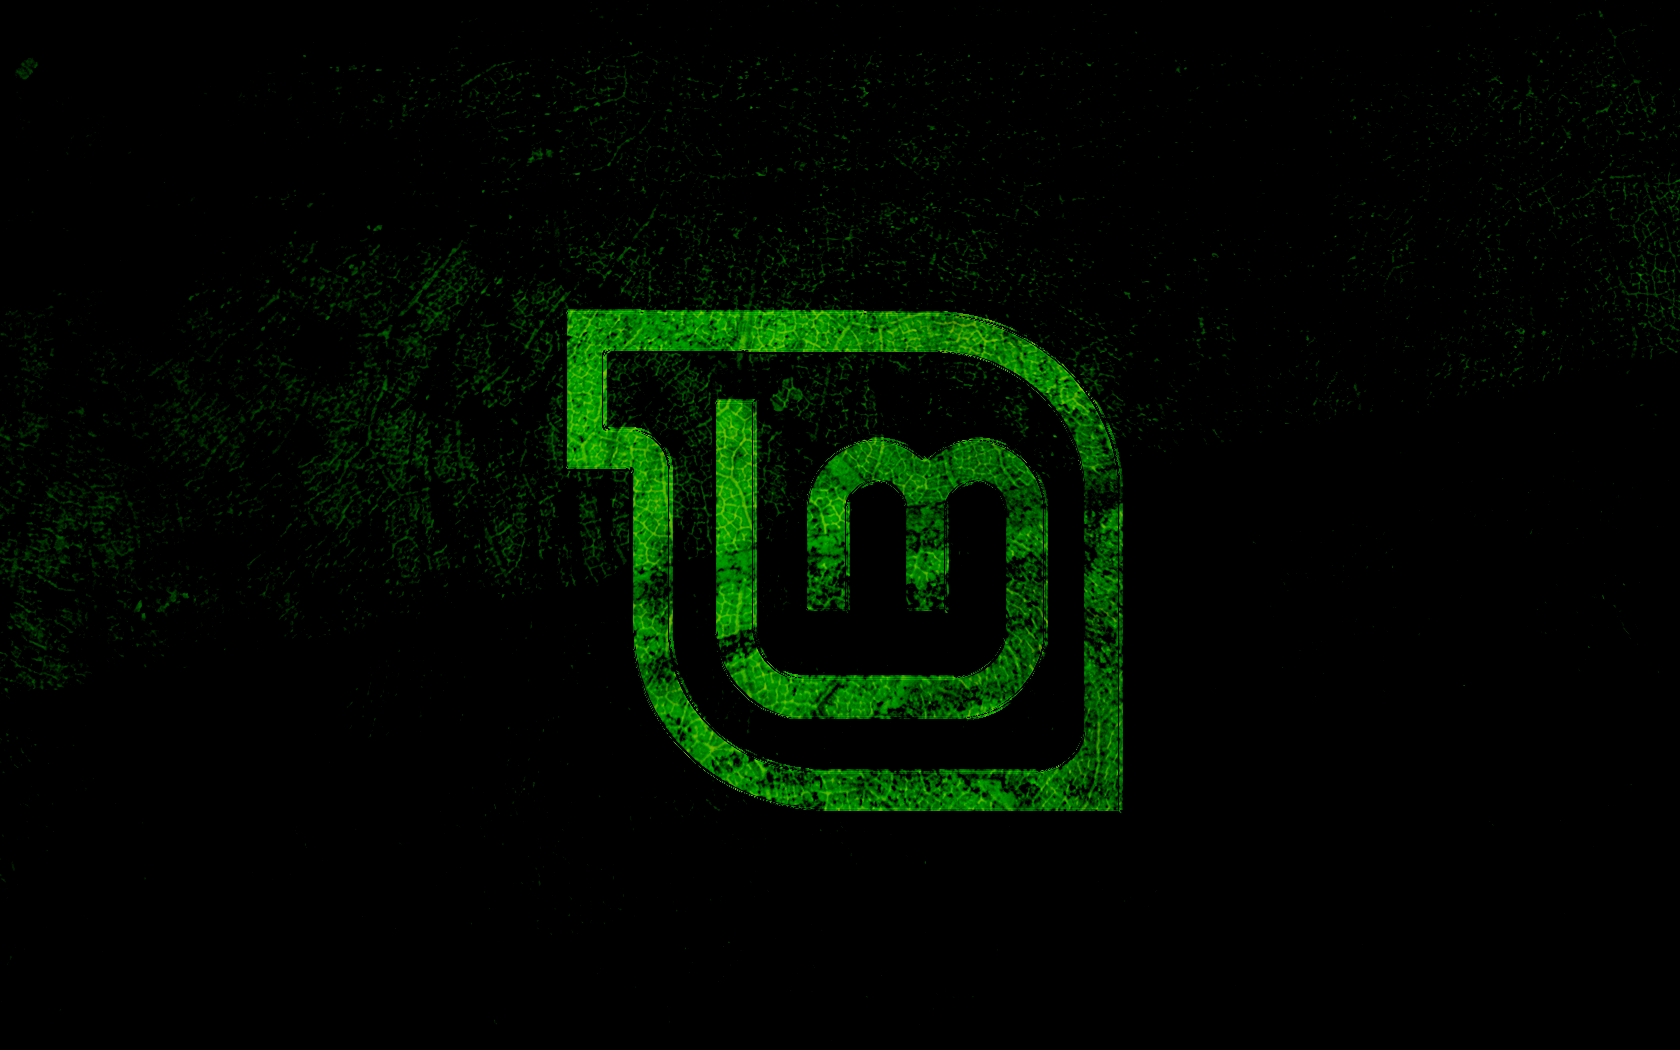 Linux Mint wallpaper 1680x1050 by zsoltp on